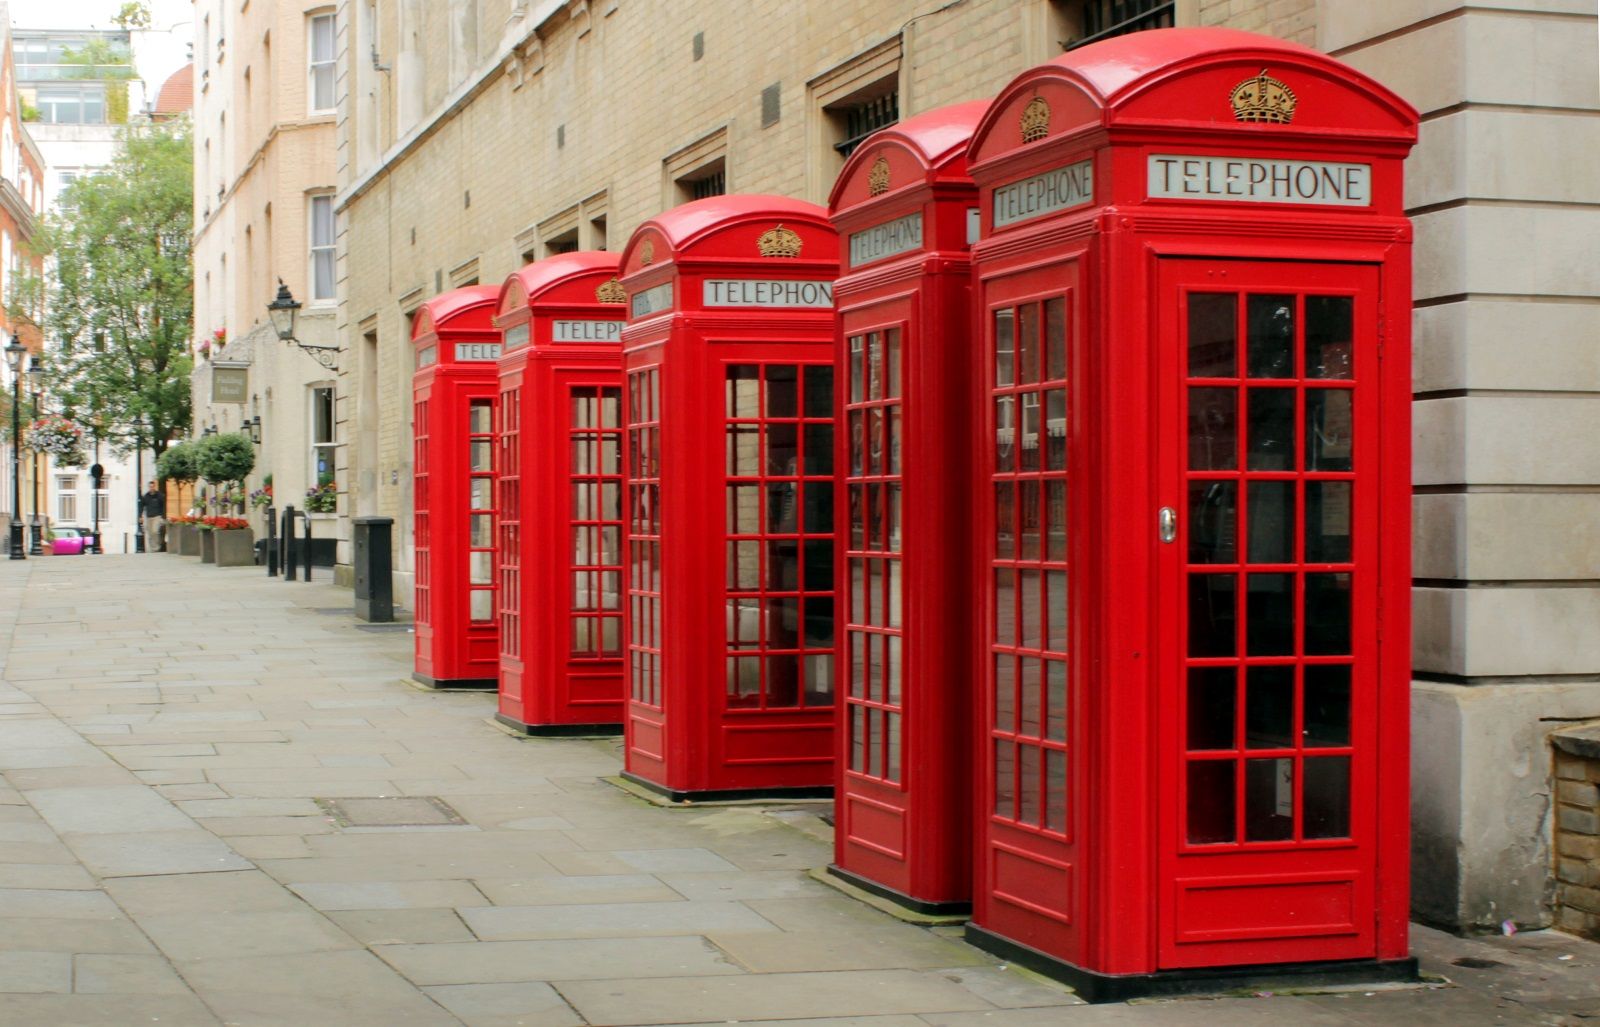 Public telephone booths